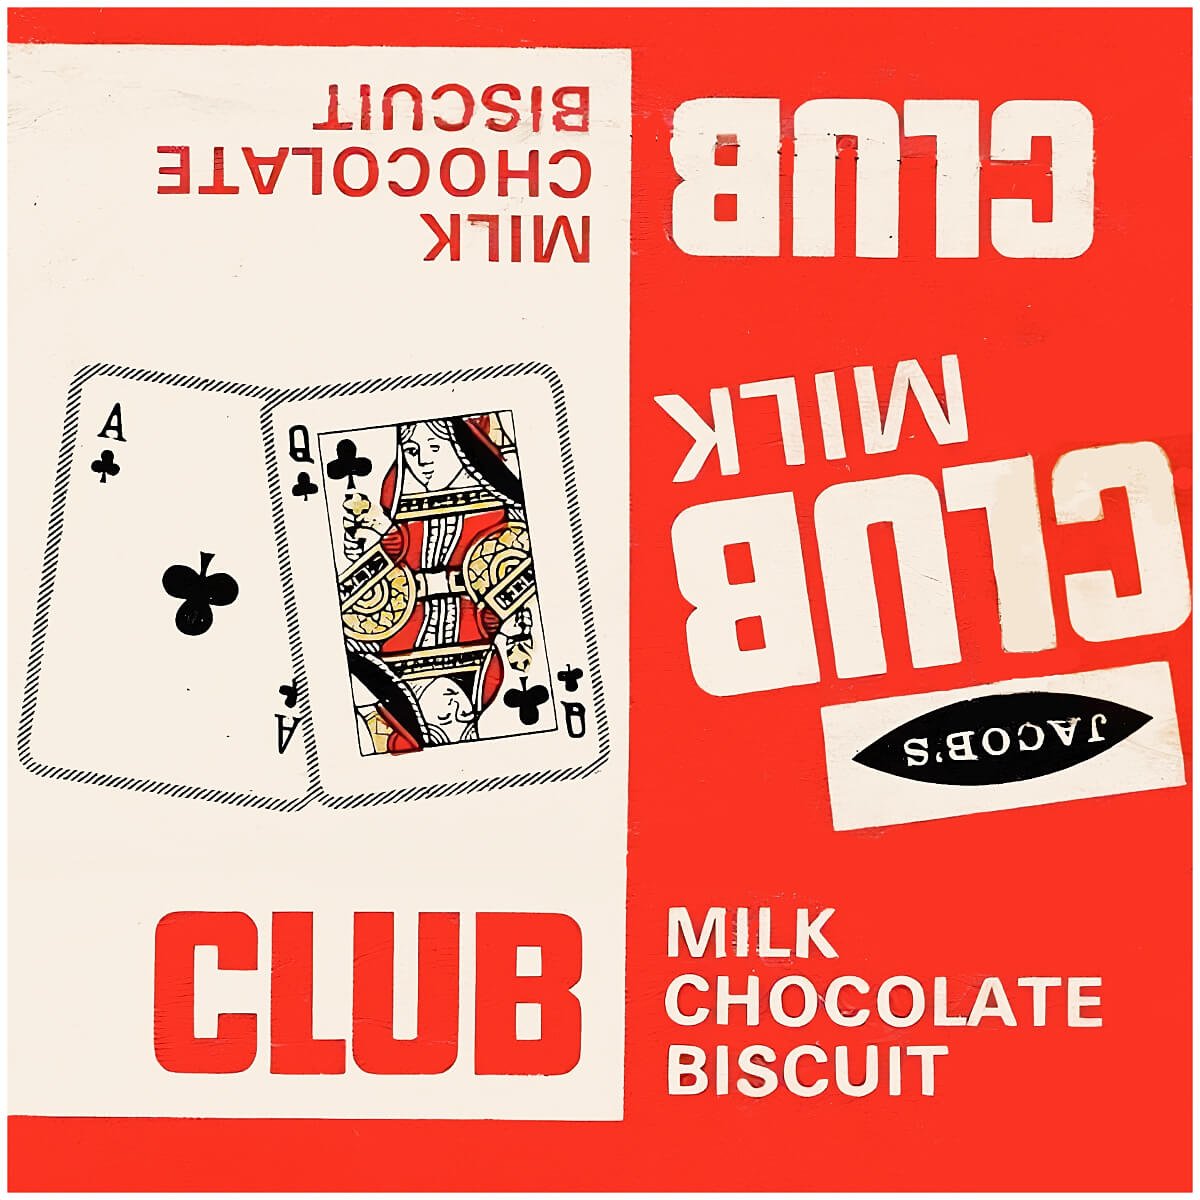 Jacob's Club Milk wrapper from 1970s, red and white with Ace and Queen of Clubs playing cards graphic